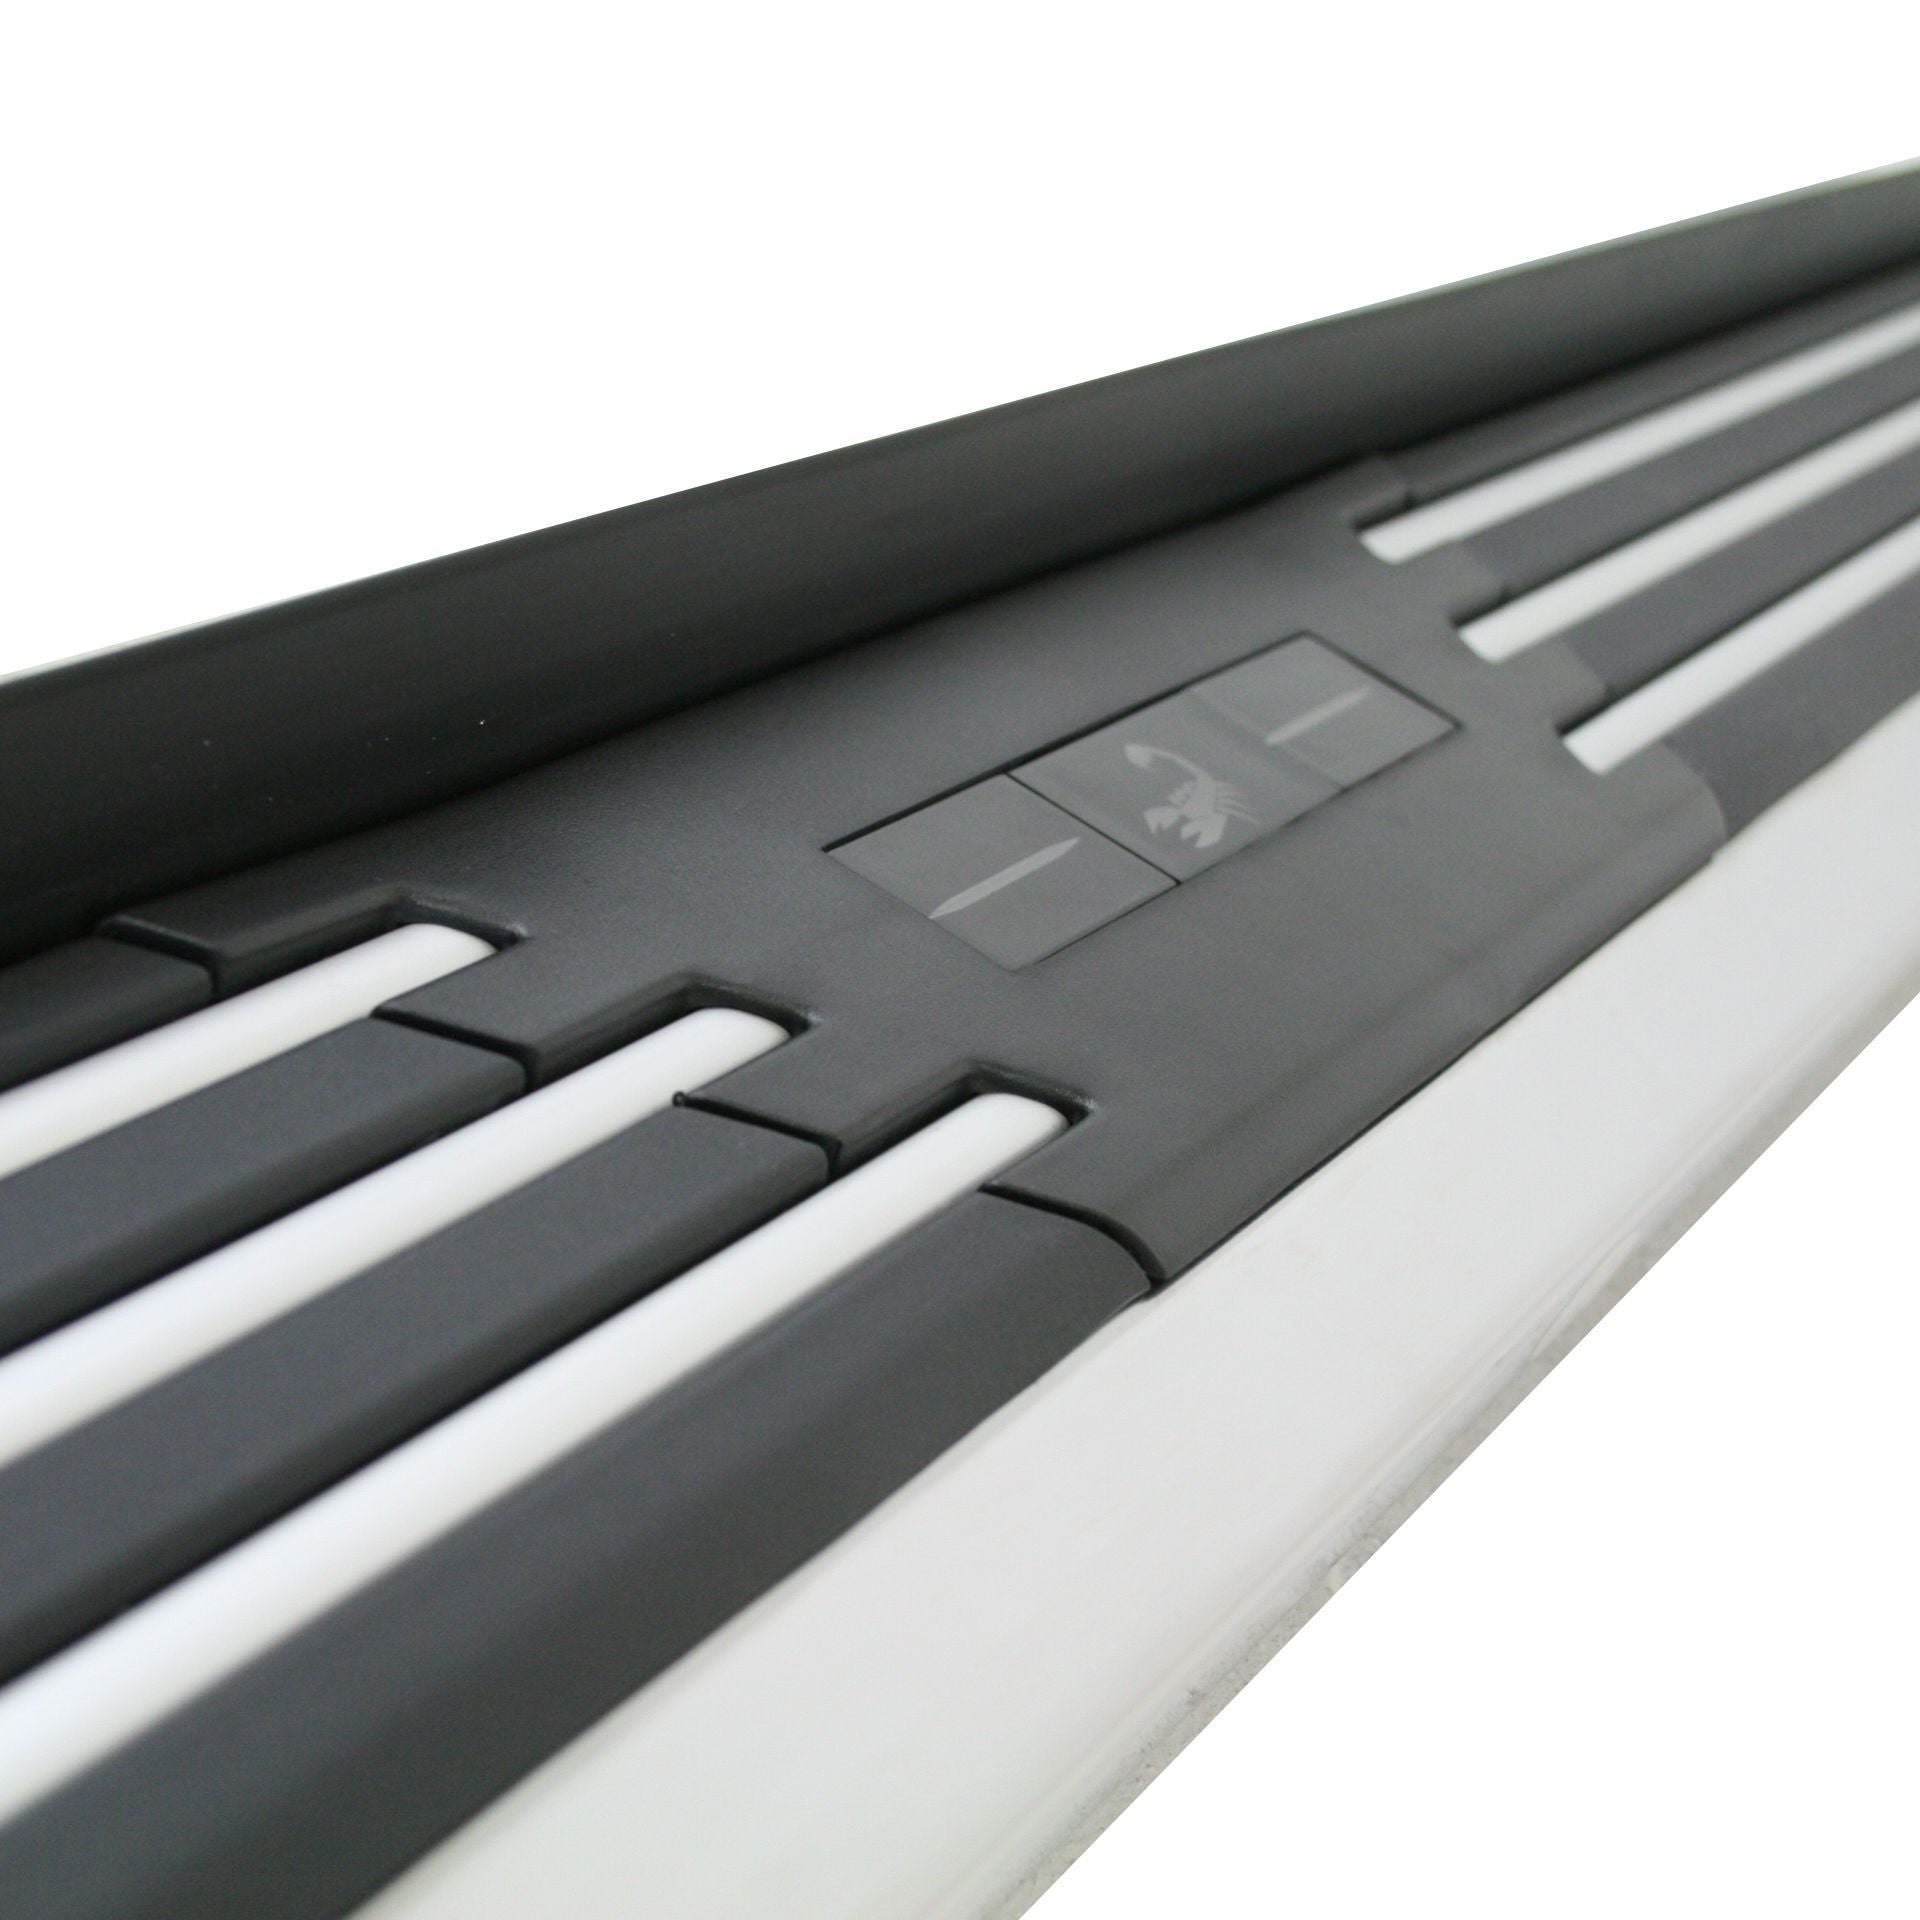 Premier Side Steps Running Boards for Lexus RX 300/350 2003-2009 -  - sold by Direct4x4